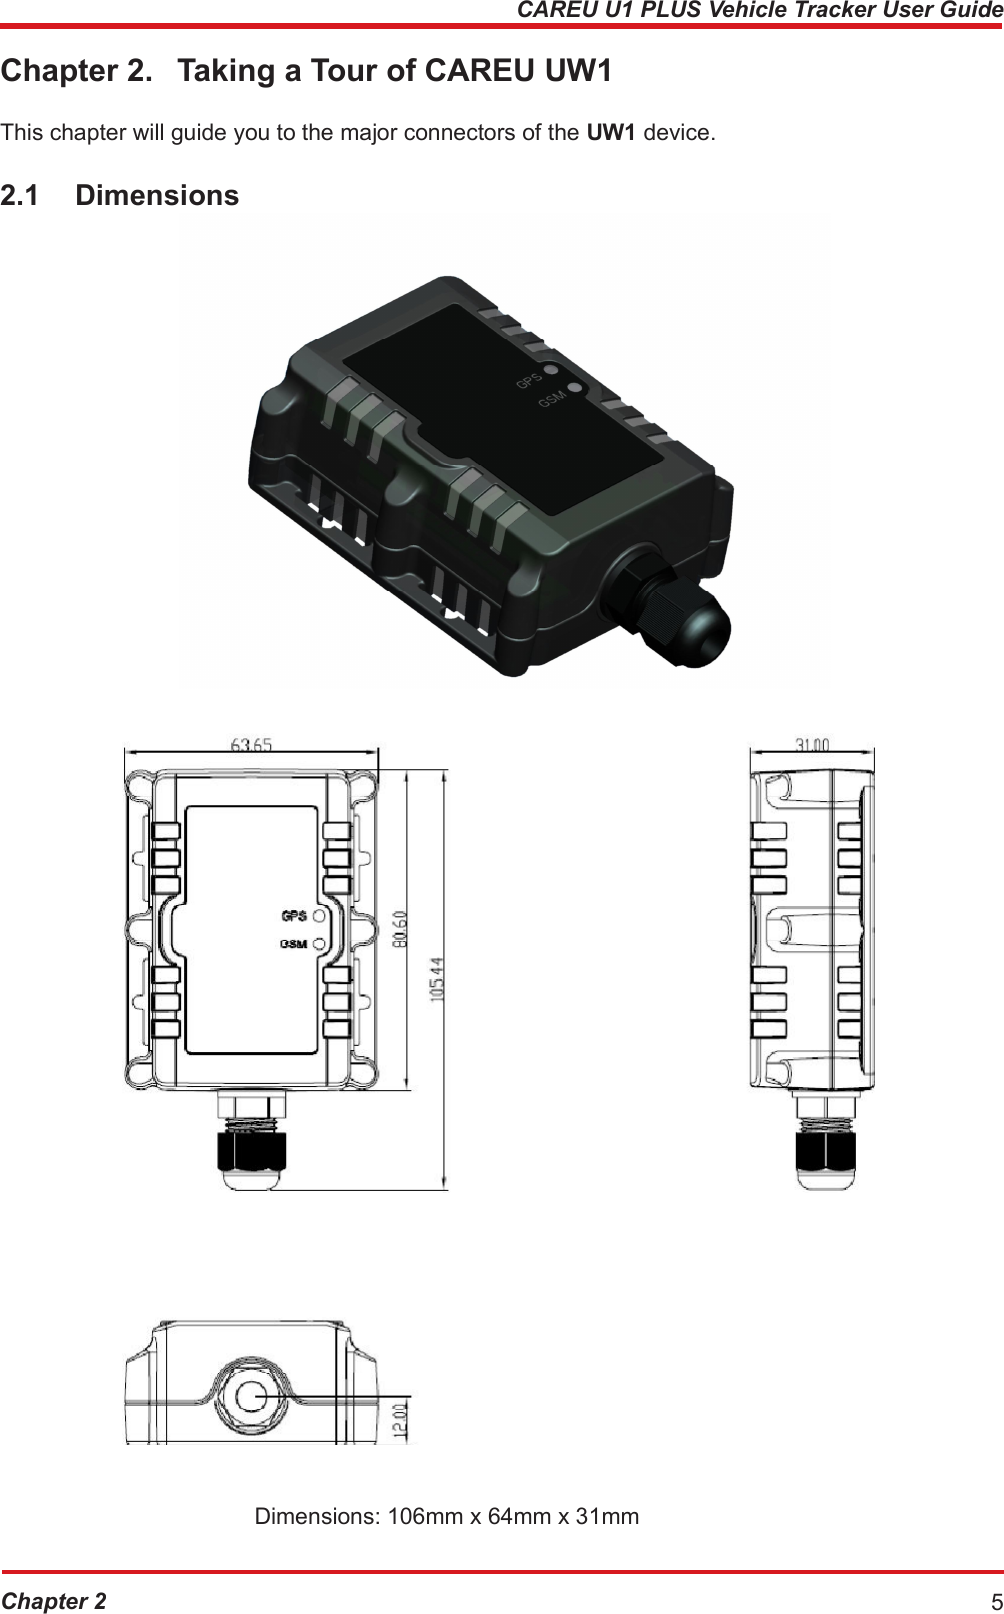 CAREU U1 PLUS Vehicle Tracker User Guide Chapter 2. Taking a Tour of CAREU UW1 This chapter will guide you to the major connectors of the UW1 device. 2.1 Dimensions Dimensions: 106mm x 64mm x 31mm Chapter 2 5 